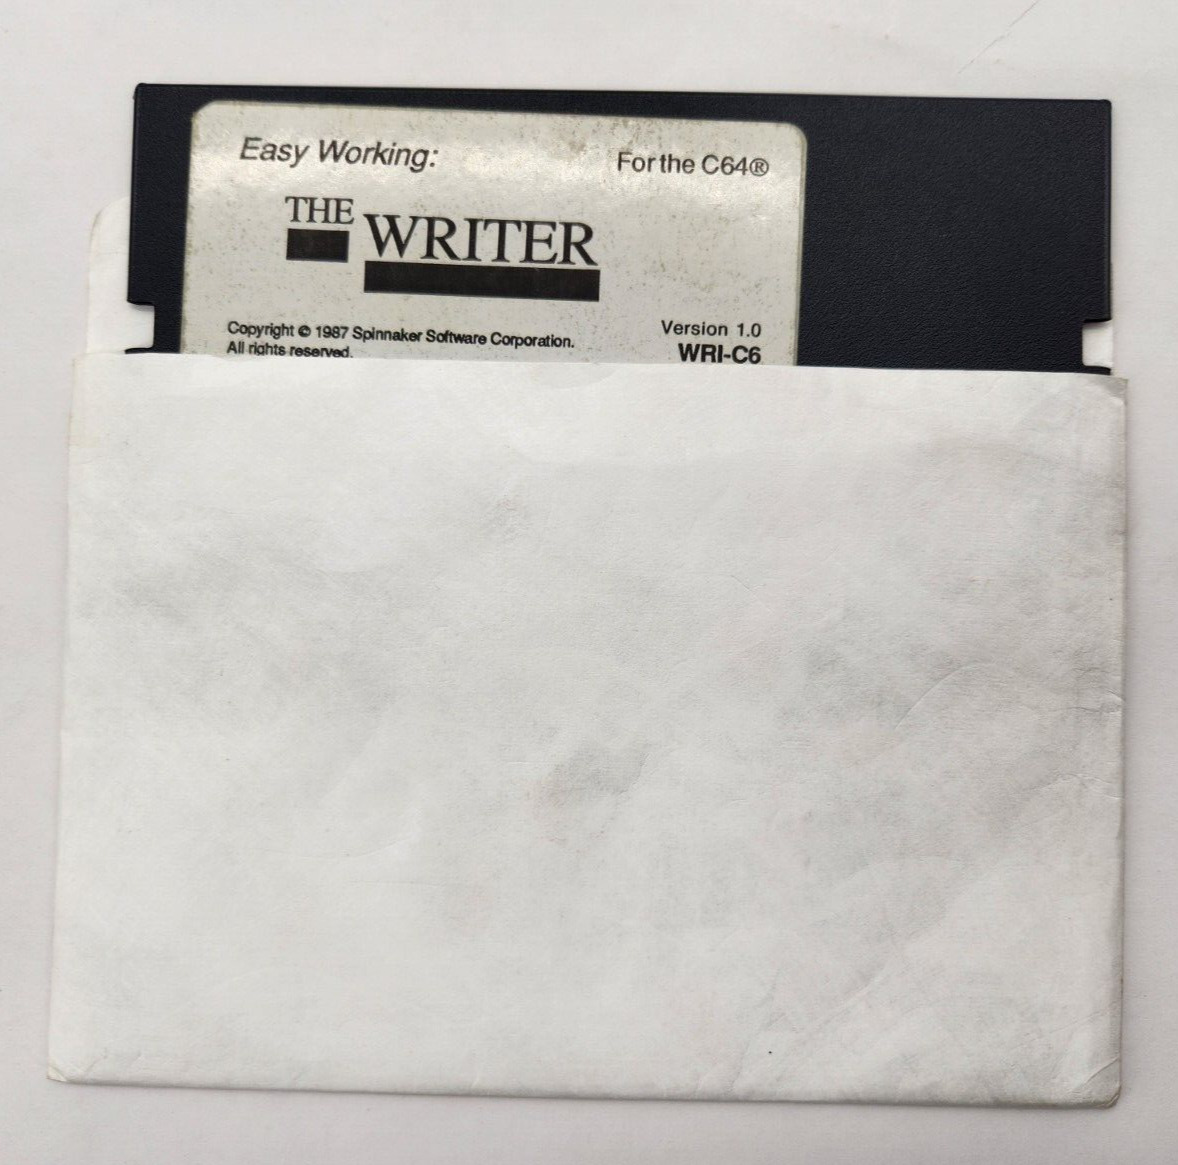 Easy Working The Writer Commodore 64 - 5.25 floppy Disk only